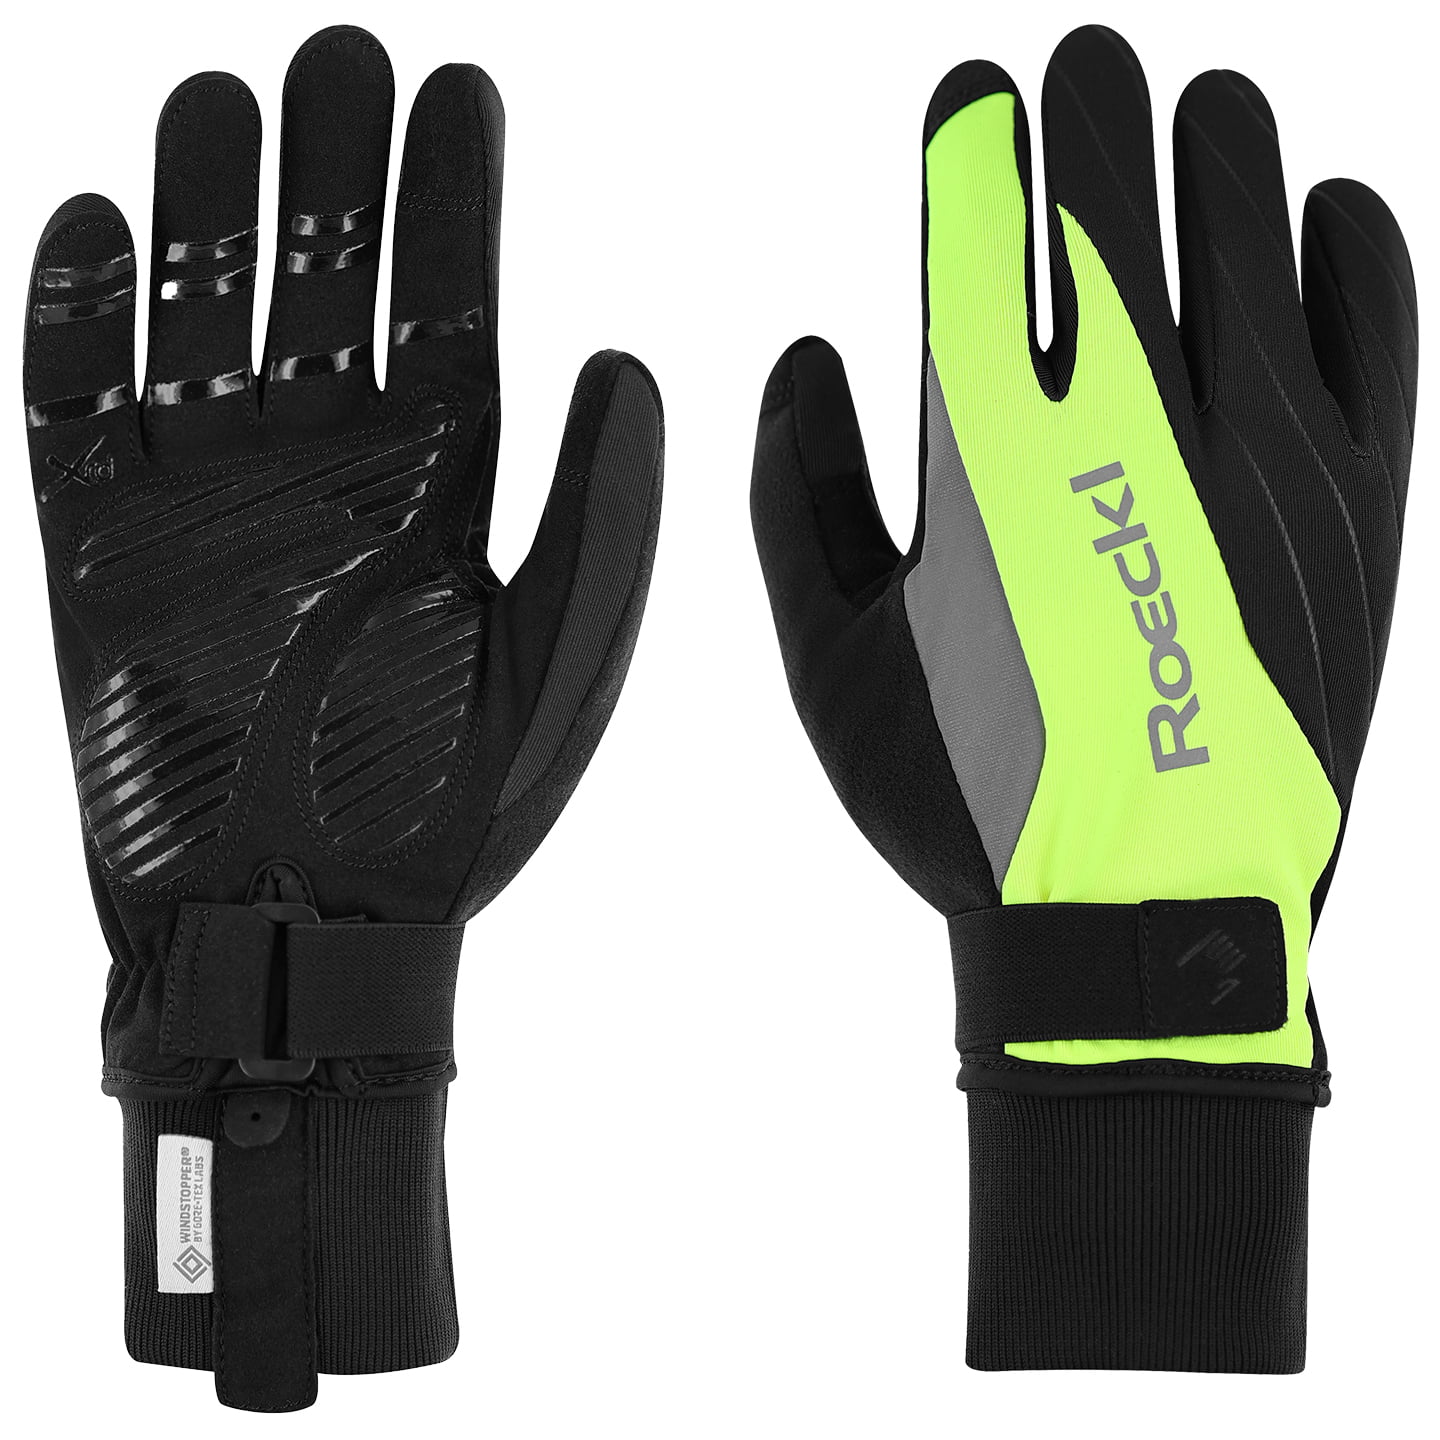 ROECKL Winter Gloves Ravensburg 2 Winter Cycling Gloves, for men, size 7,5, MTB gloves, MTB clothing